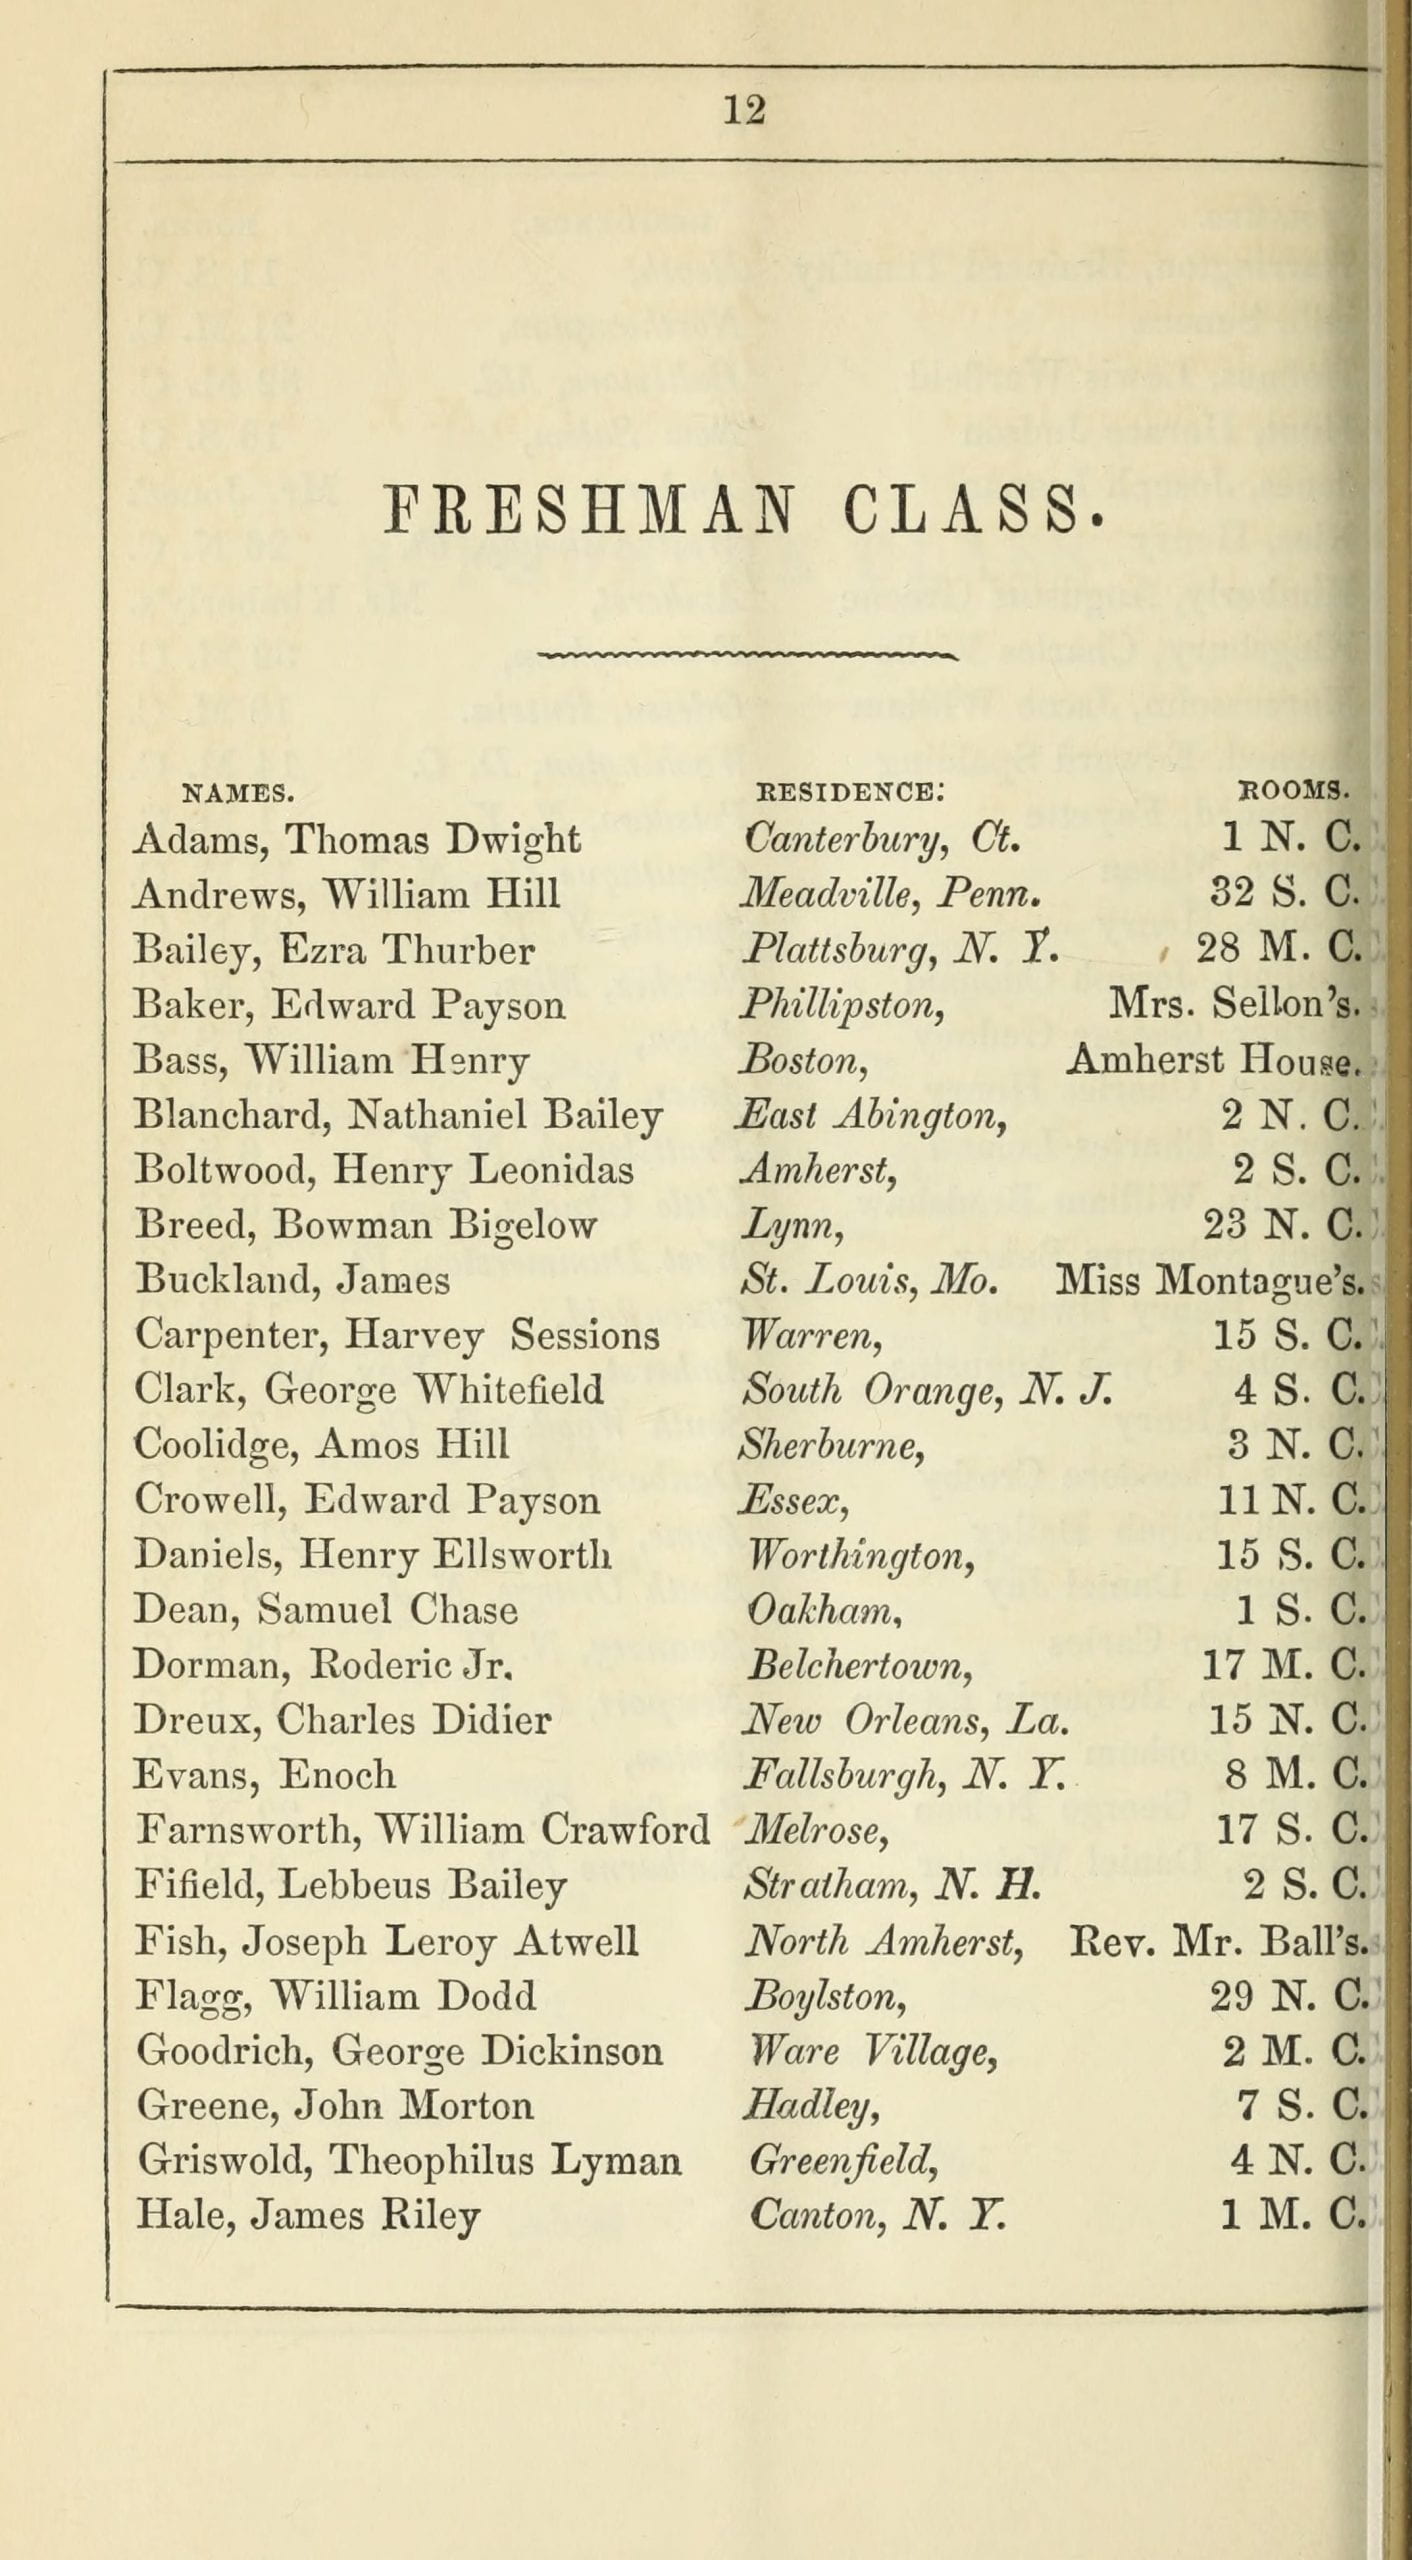 Catalog for the 1849-50 academic year